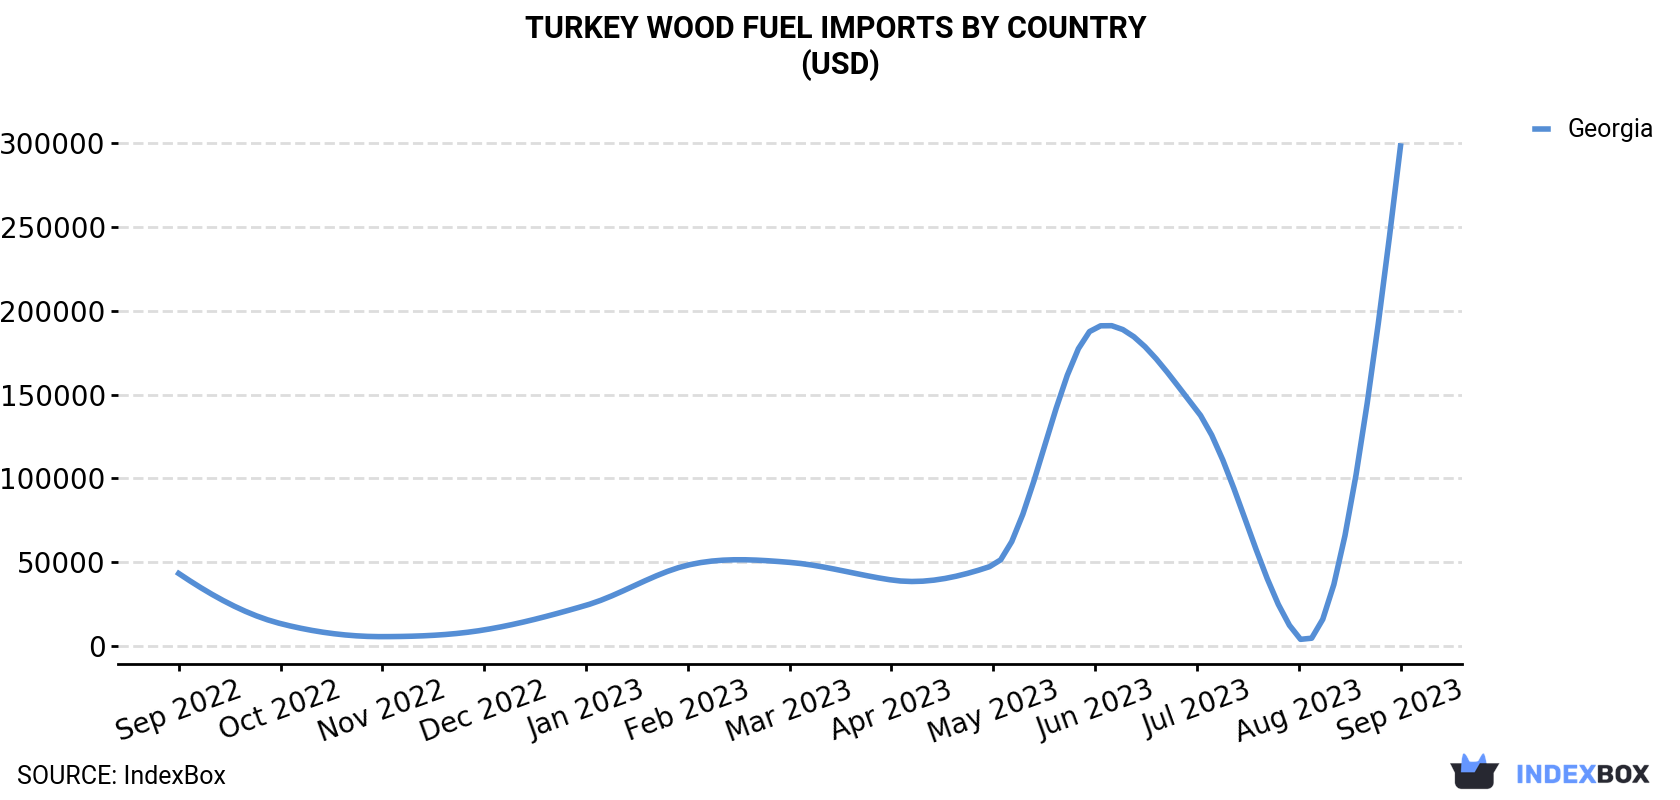 Turkey Wood Fuel Imports By Country (USD)